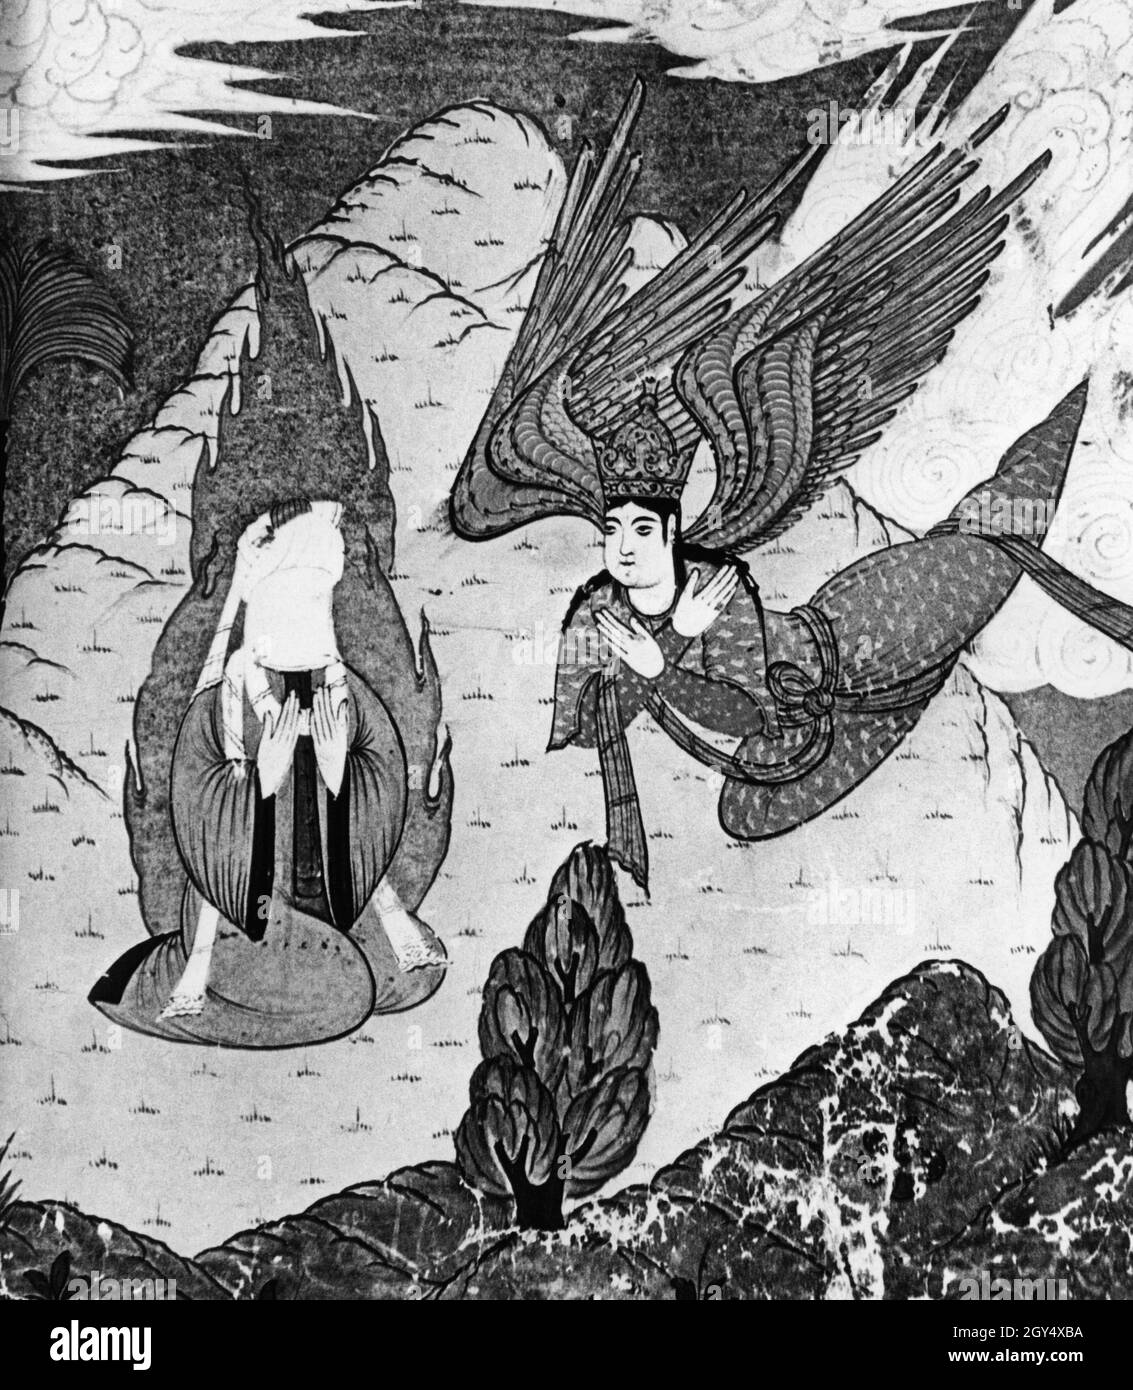 The Turkish miniature shows Mohammed (left), whose face may not be shown according to Muslim principles, being visited by the archangel Gabriel, who announces his mission as a prophet. Muhammad was born in Mecca around 570, is said to have been called by the archangel in 610, and died on June 8, 623. At the calling he held the revelation, the core of which is the uniqueness of the creator and the last judgement. [automated translation] (Date created: 01.01.0610-31.12.0610) Stock Photo